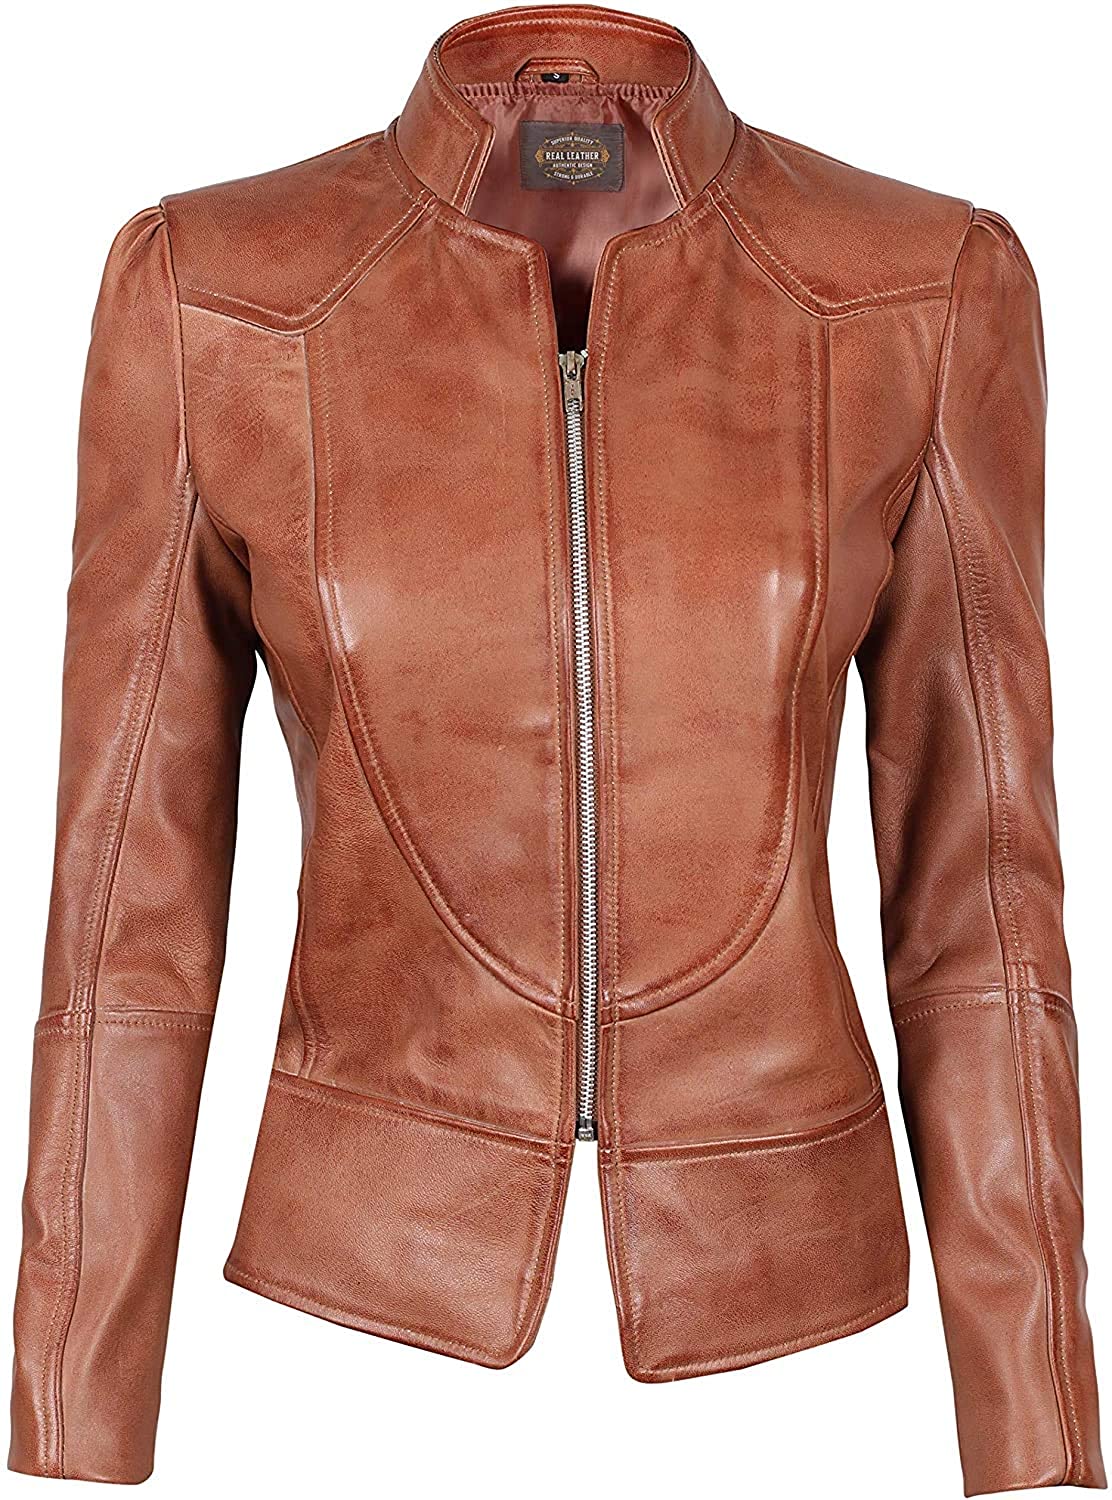 Decrum Real Leather Jackets for Women Lambskin Womens Leather Jacket 